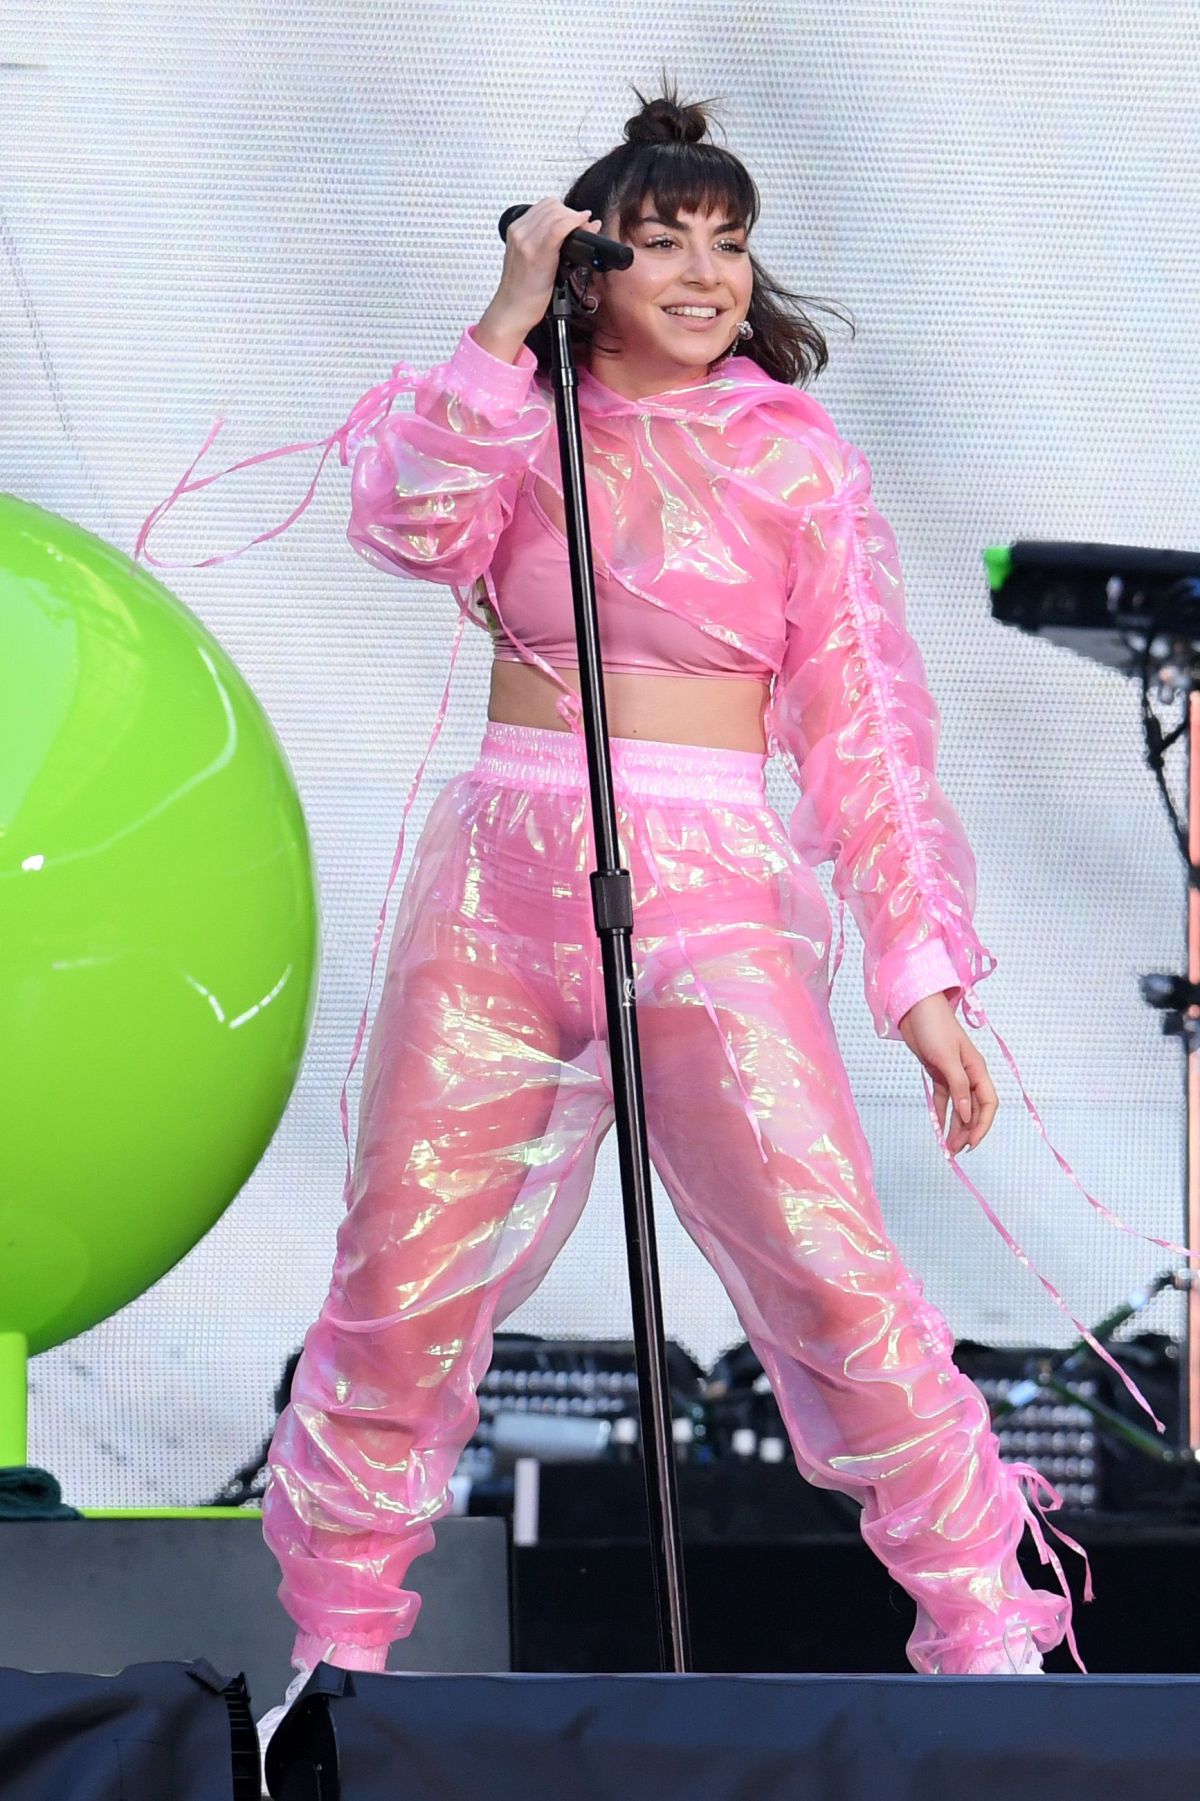 charli-xcx-performs-at-taylor-swift-s-reputation-tour-at-wembley-stadium-in-london-06-22-2018-1.jpg